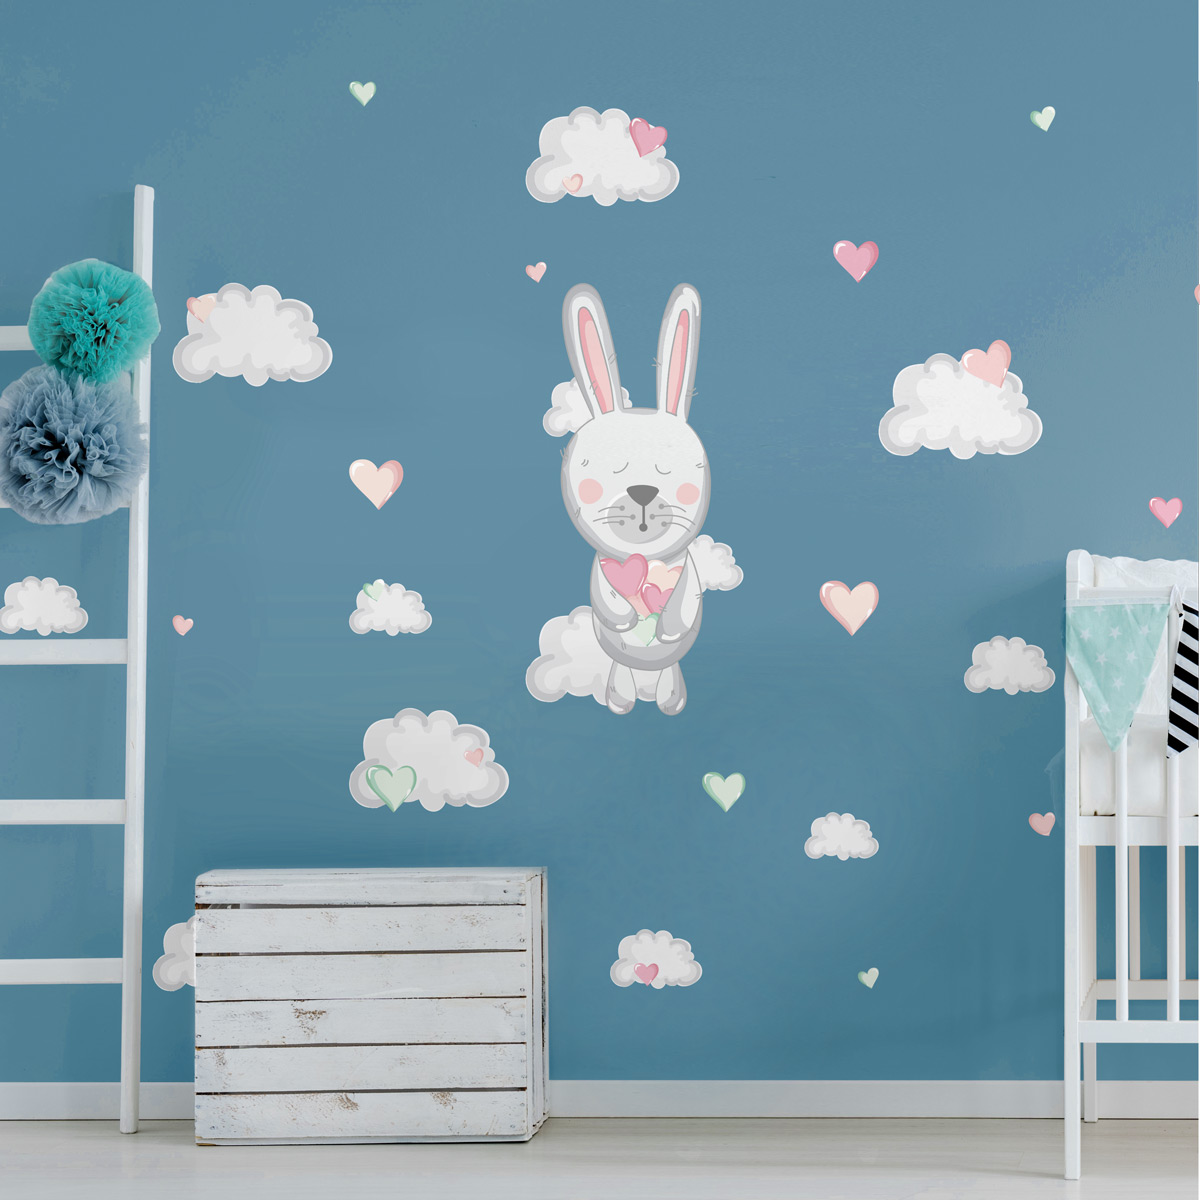 Rabbits in the clouds of hearts wall decal